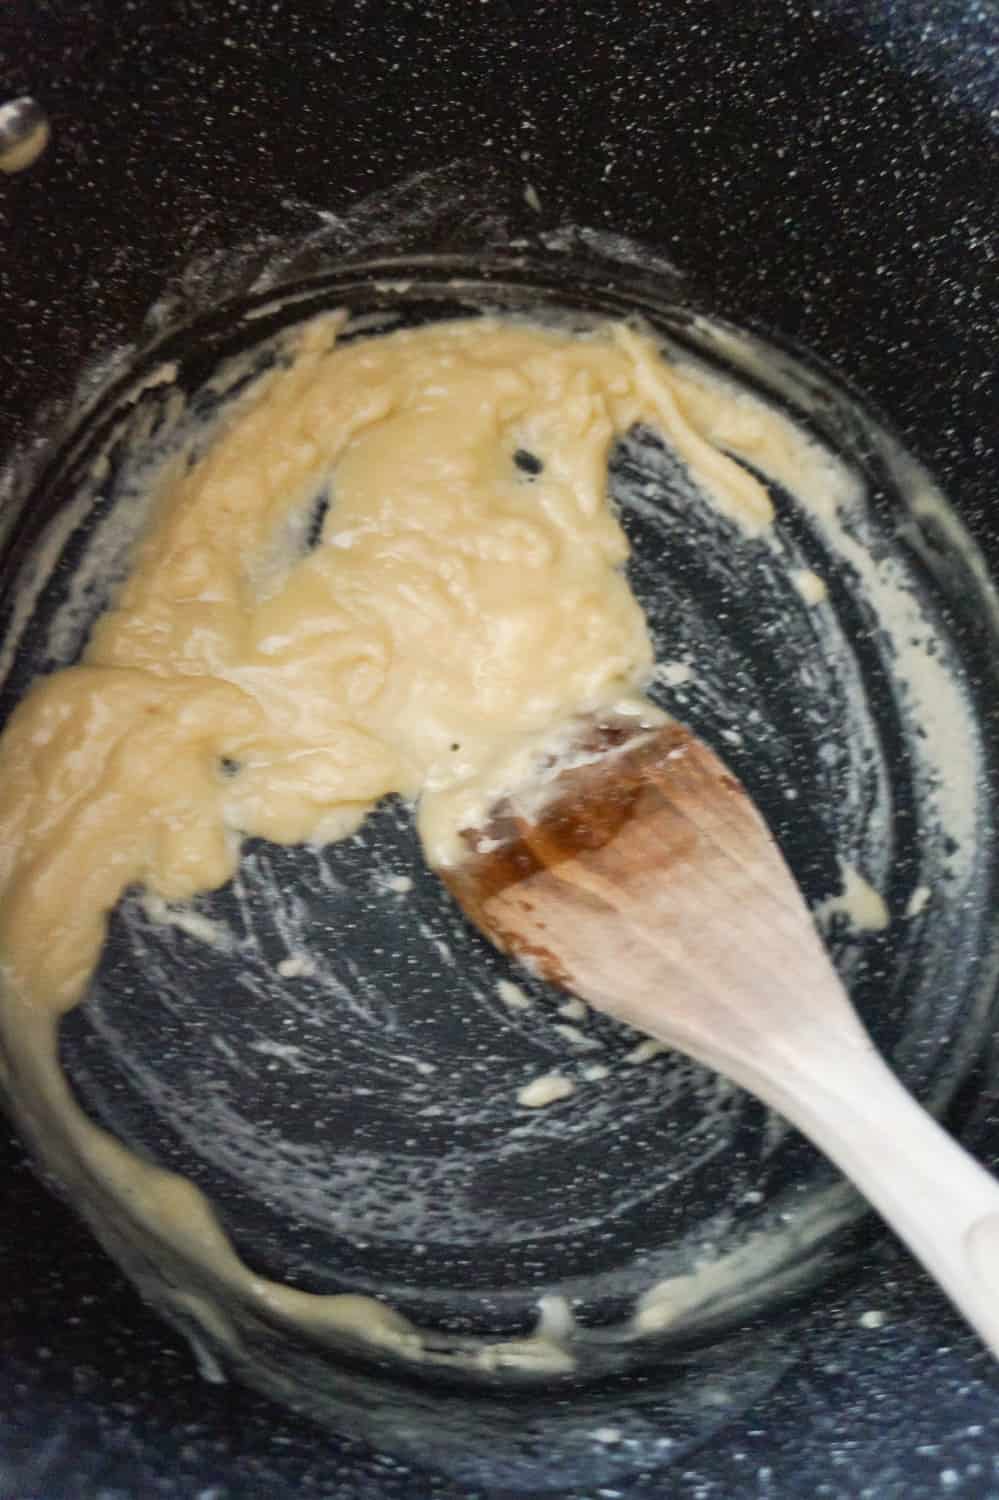 flour and butter mixture in a large pot